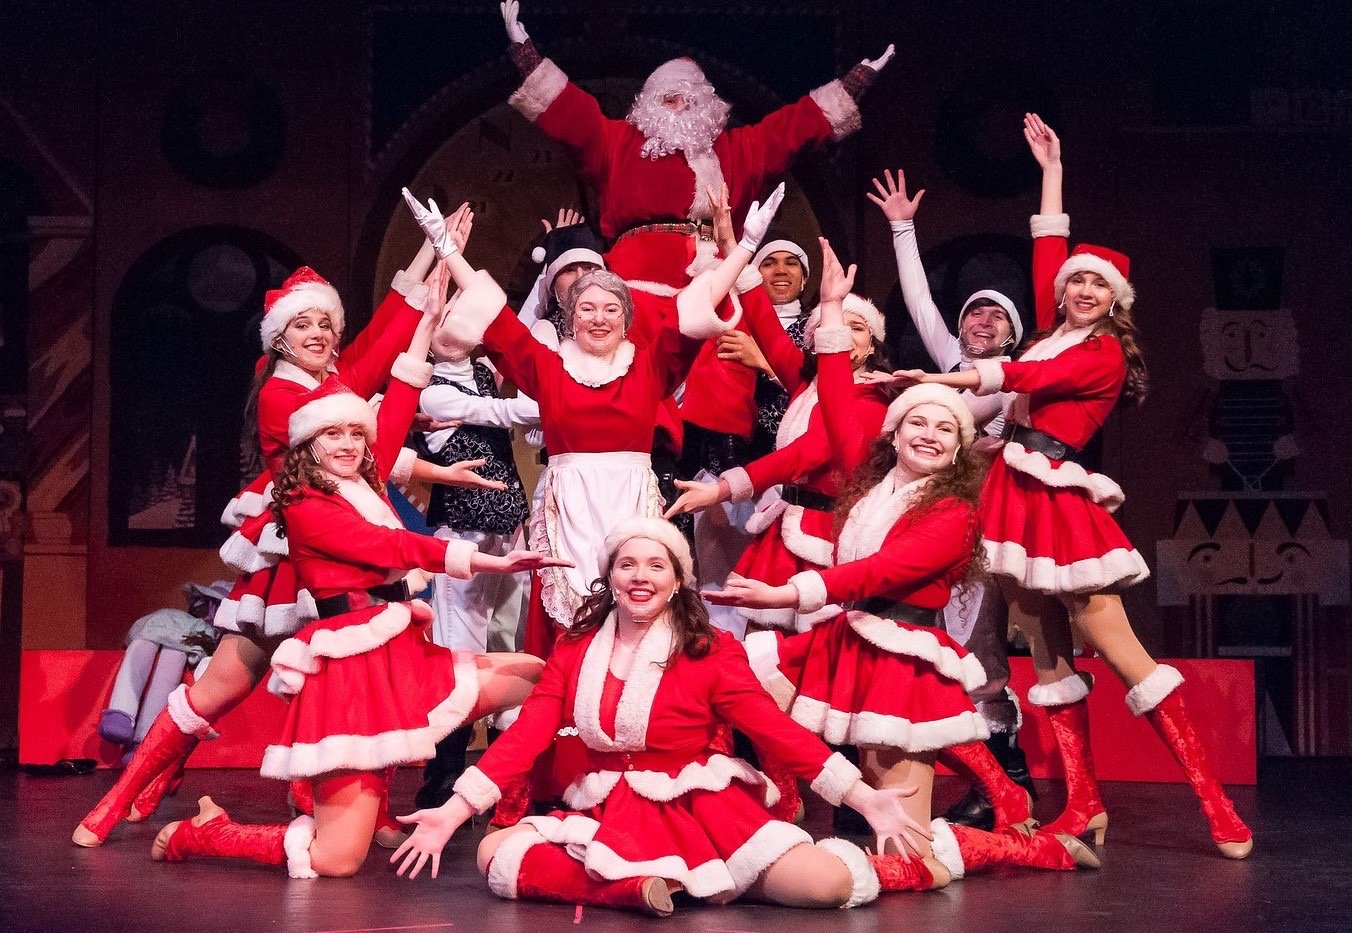 The Talent Machine’s holiday show, which has been delighting children and families for more than 30 years, features Rudolph, the elves, Frosty the Snowman and, of course, Santa.